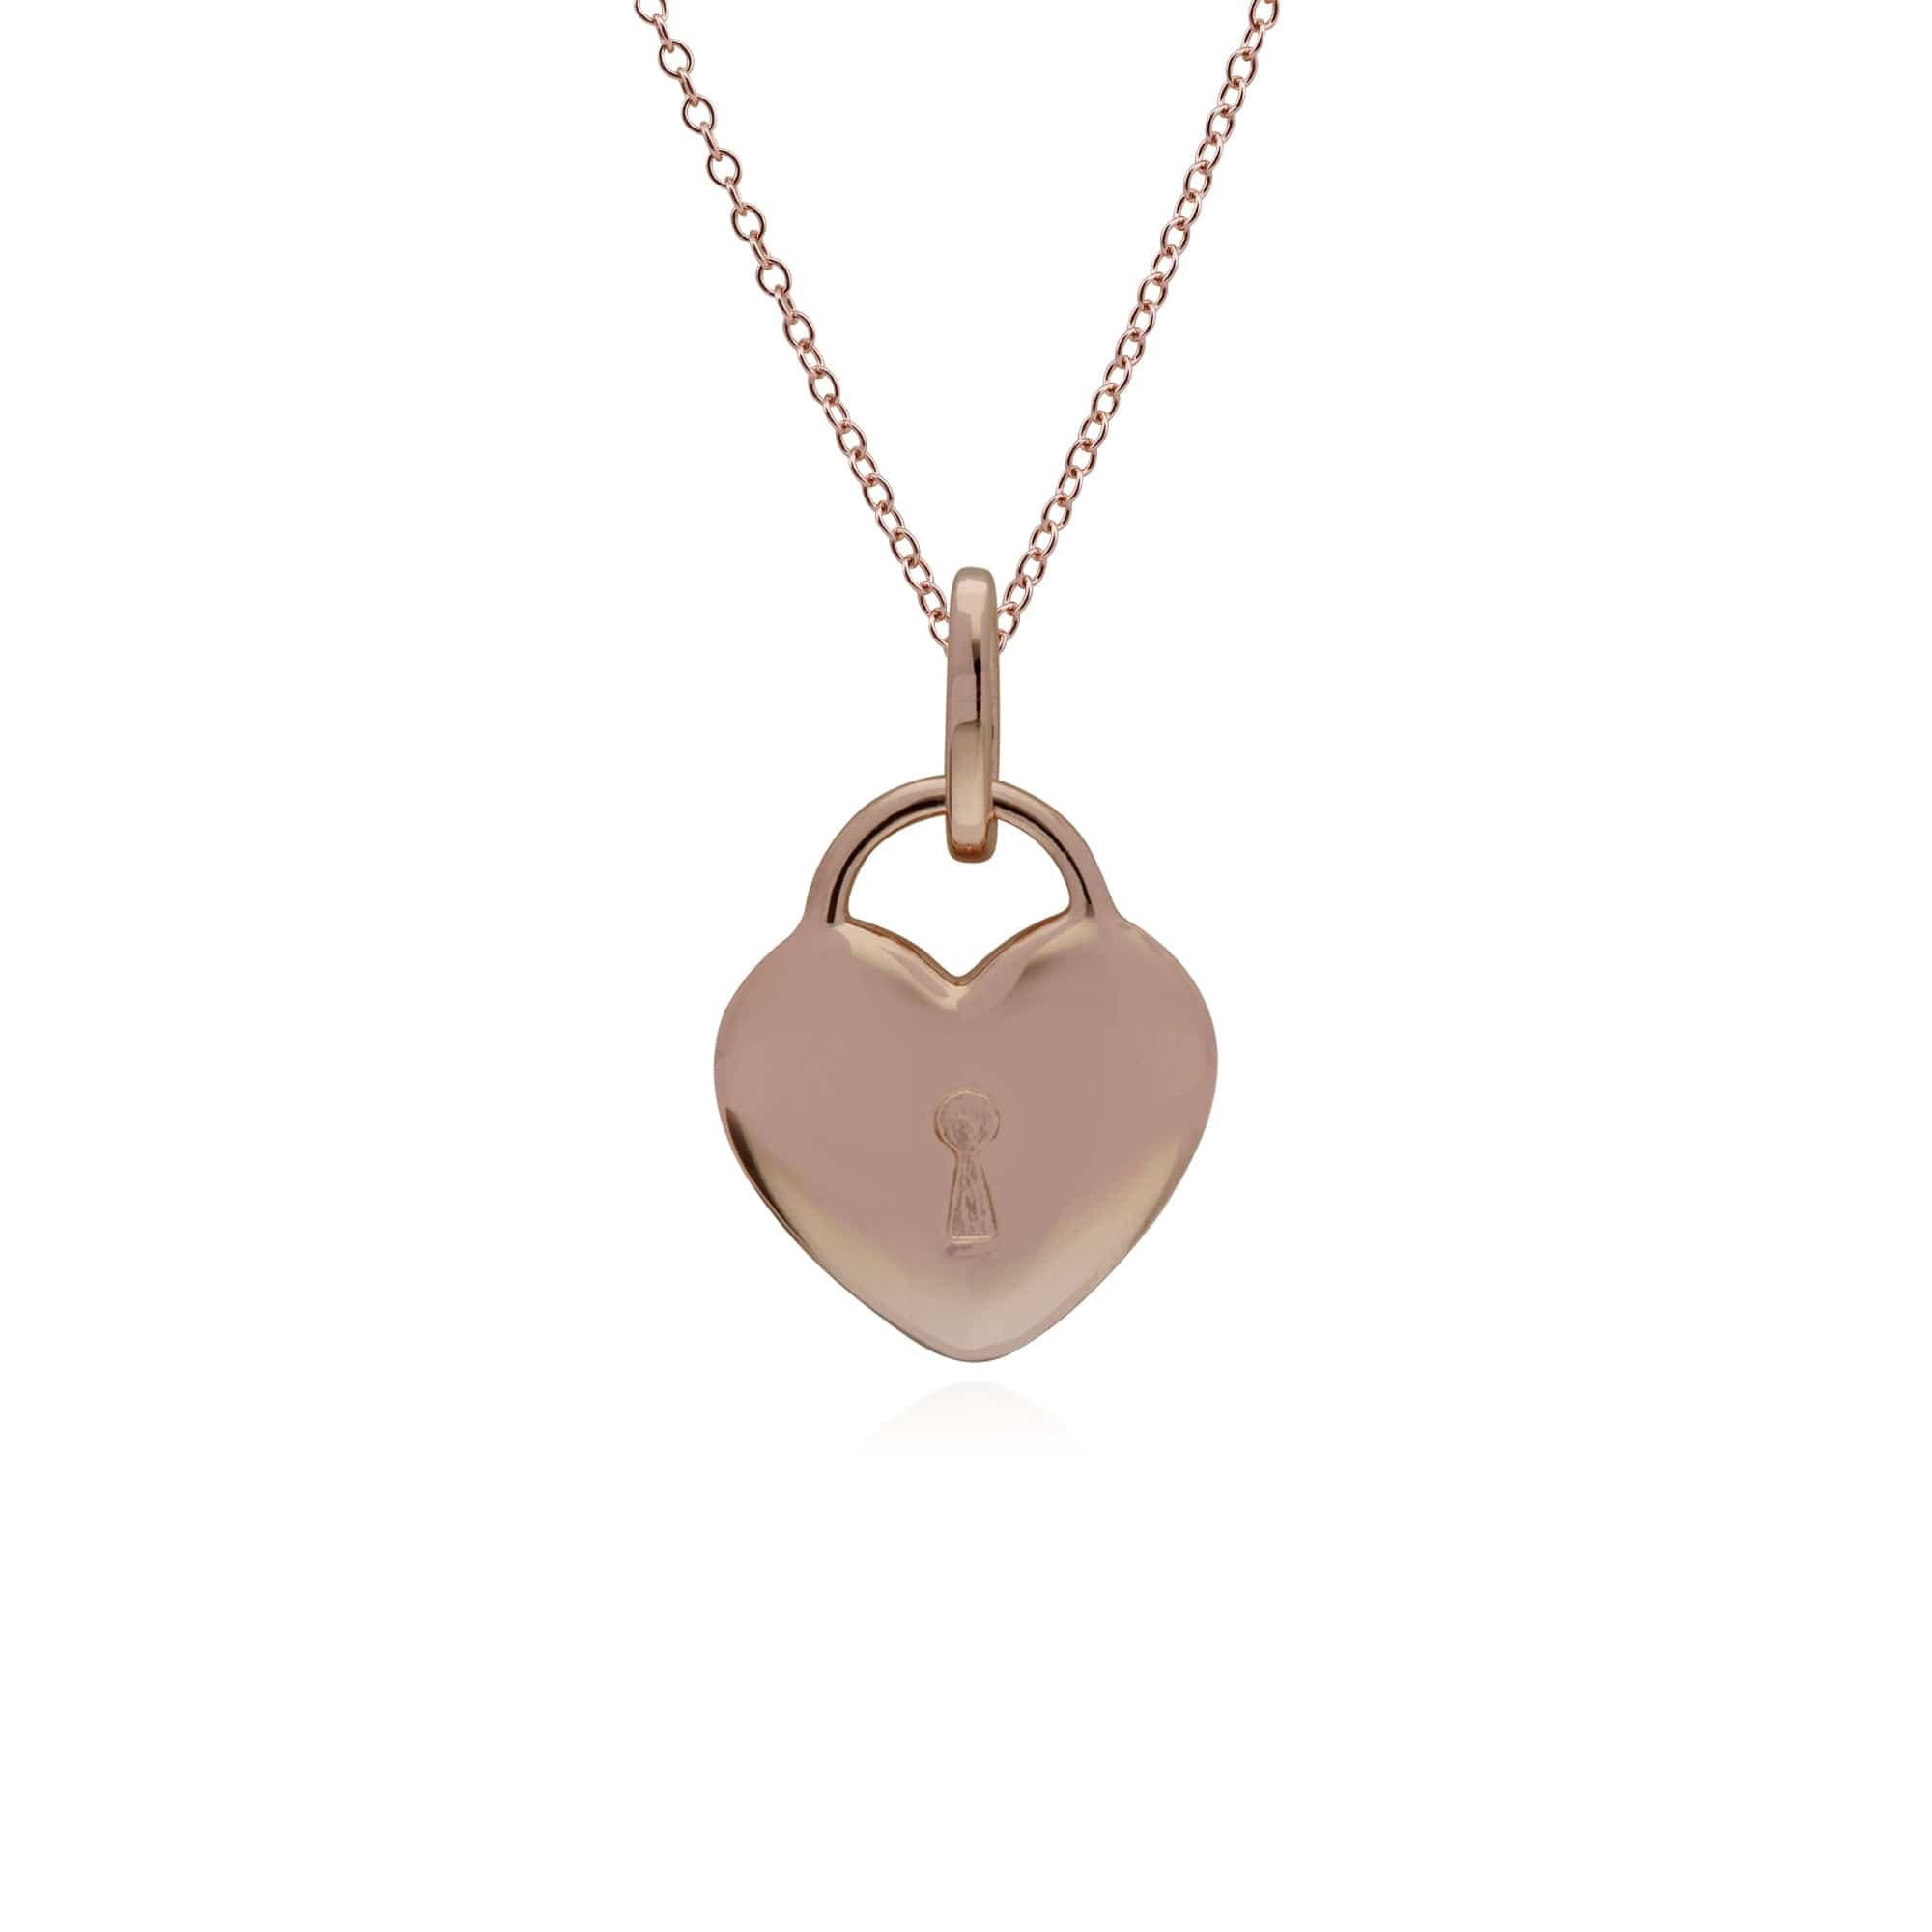 270P028602925-270P026901925 Classic Heart Lock Pendant & Opal Key Charm in Rose Gold Plated 925 Sterling Silver 3